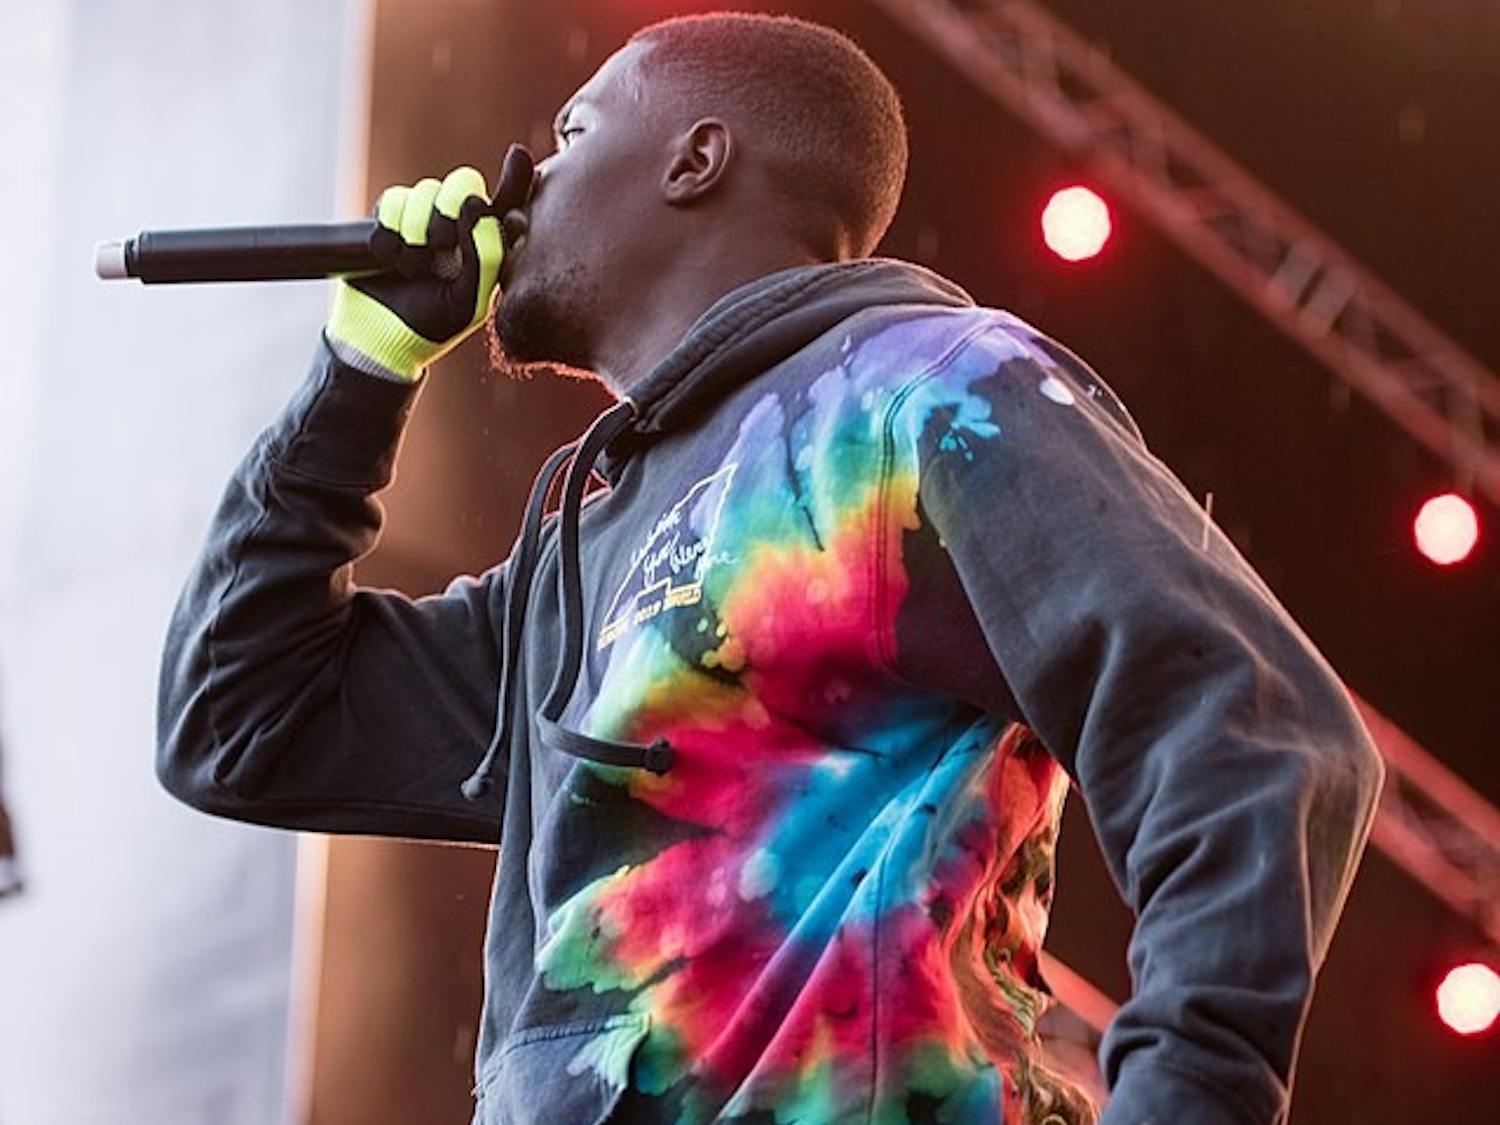 Sheck Wes, seen here performing at Openair Frauenfeld in 2019, is best known for his 2017 sleeper hit “Mo Bamba.”&nbsp;